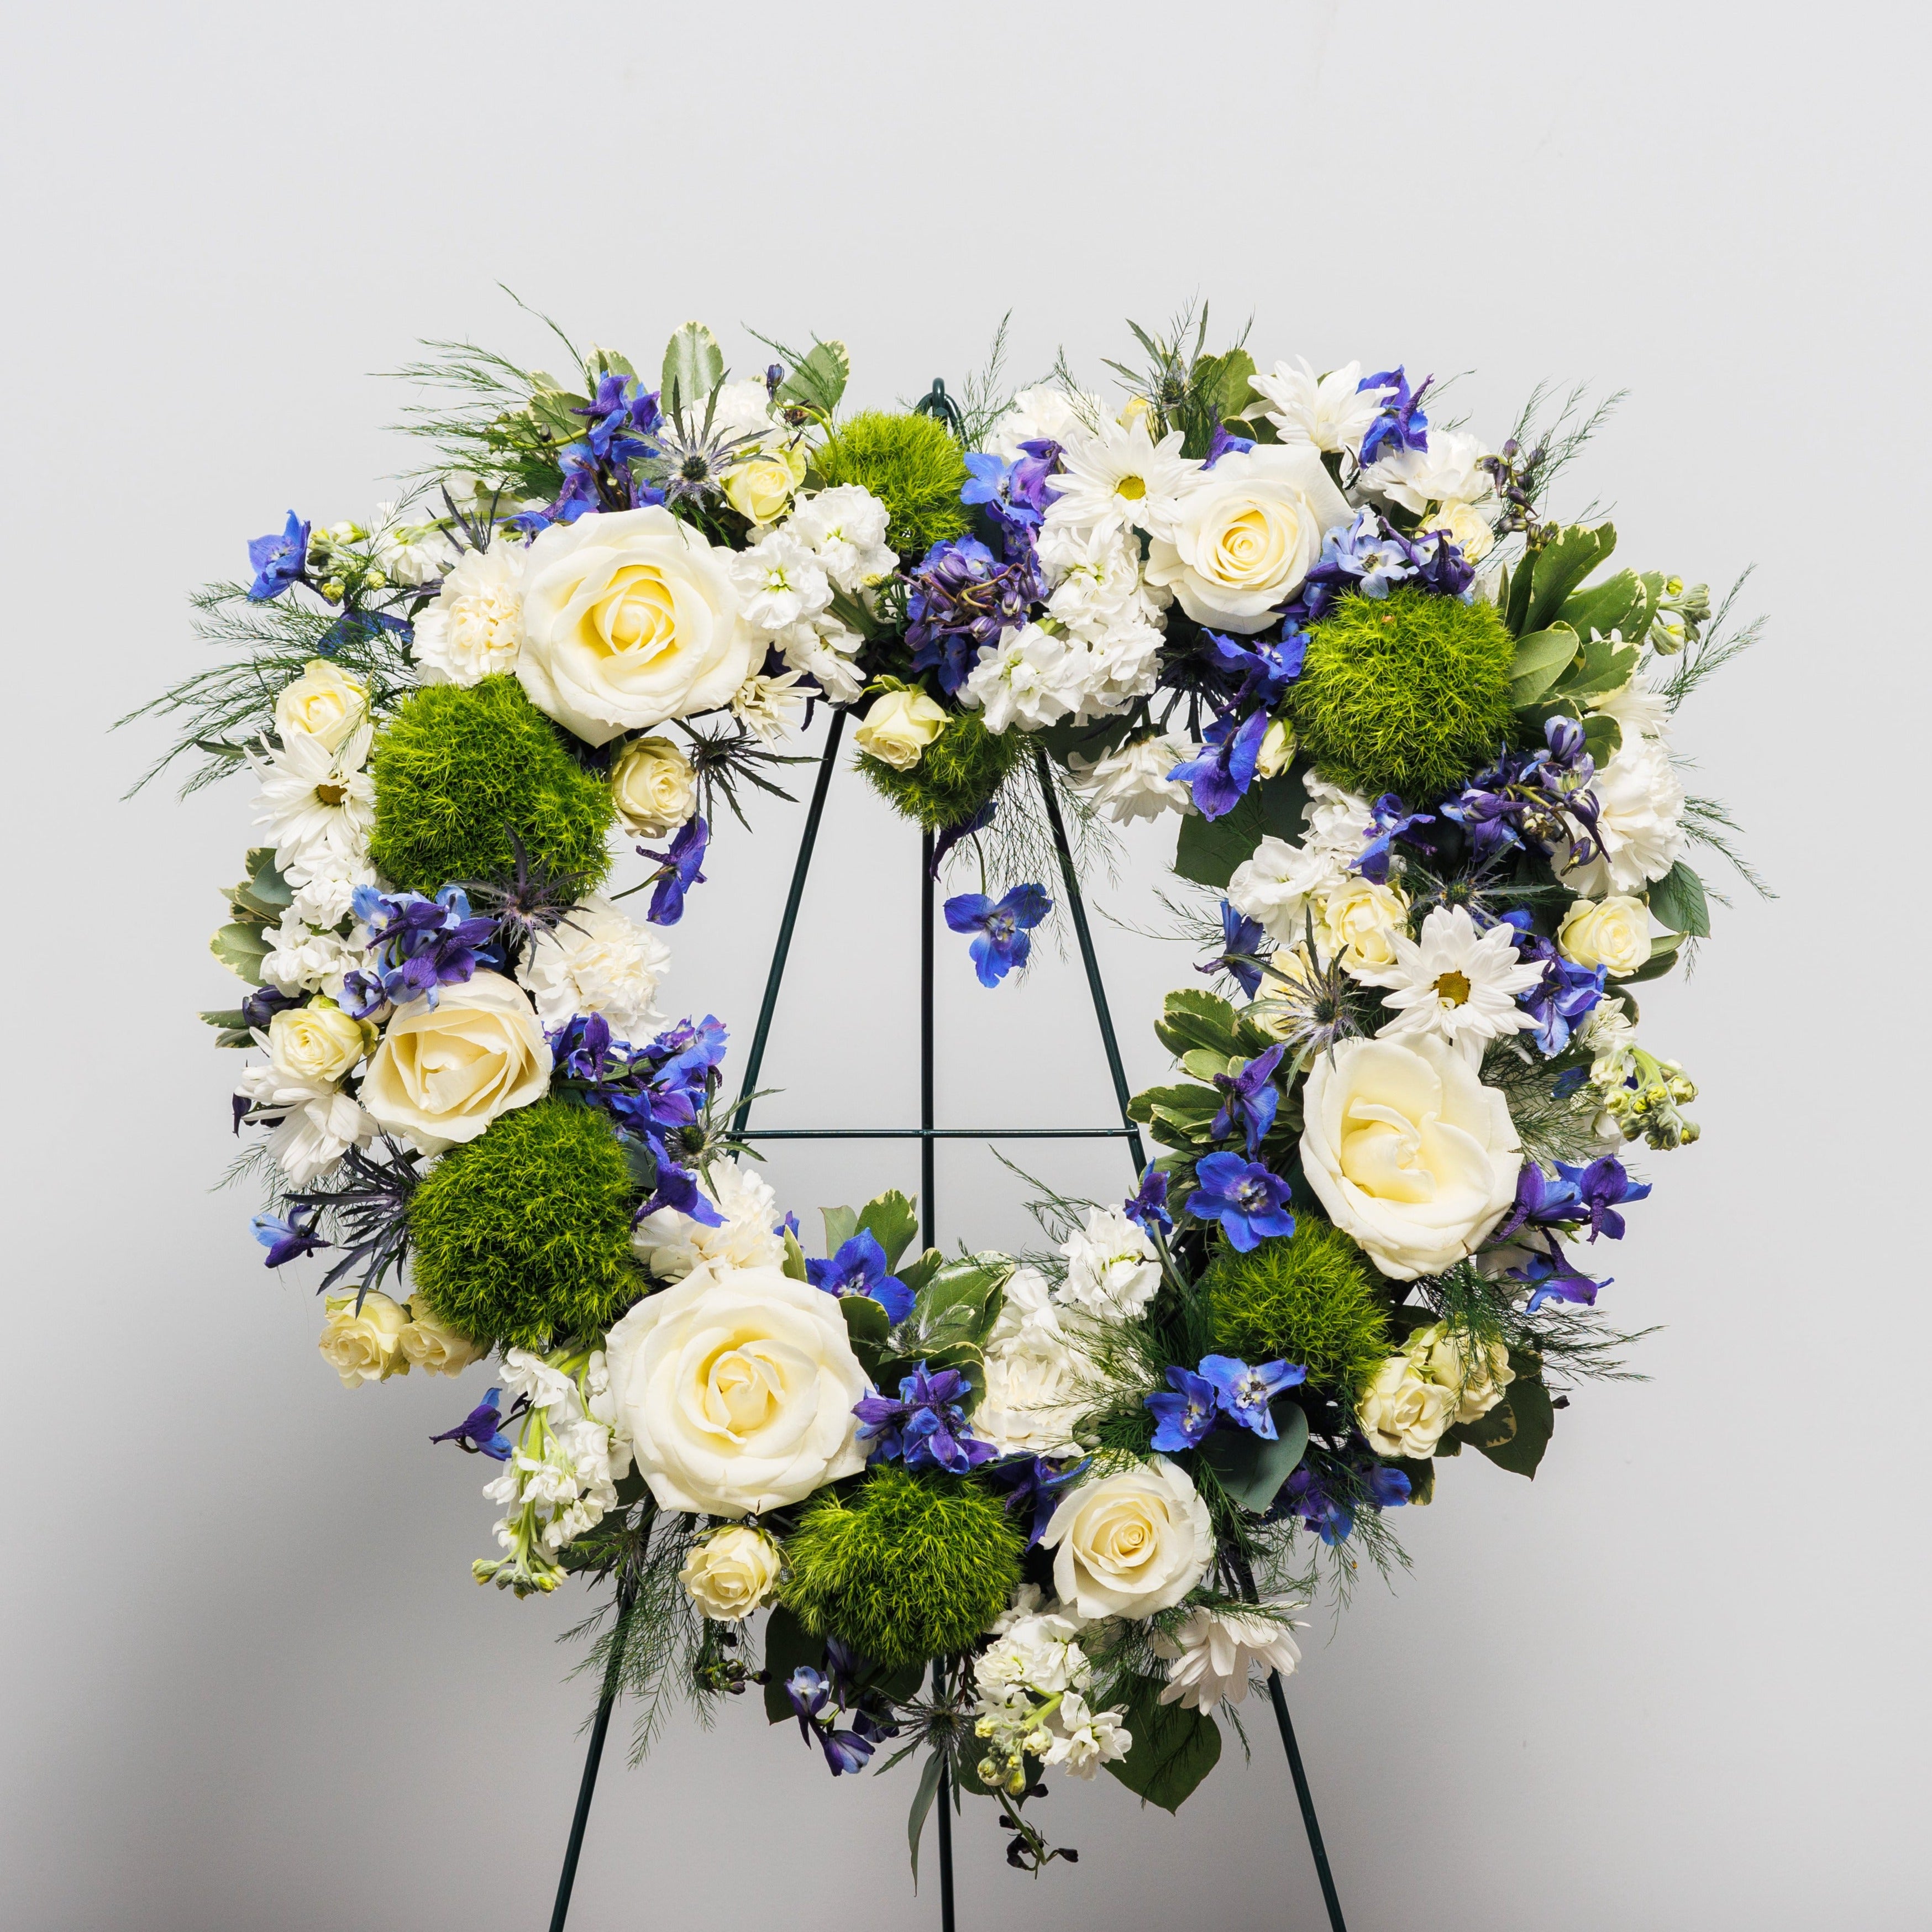 An open heart standing spray with white, green and blue flowers.